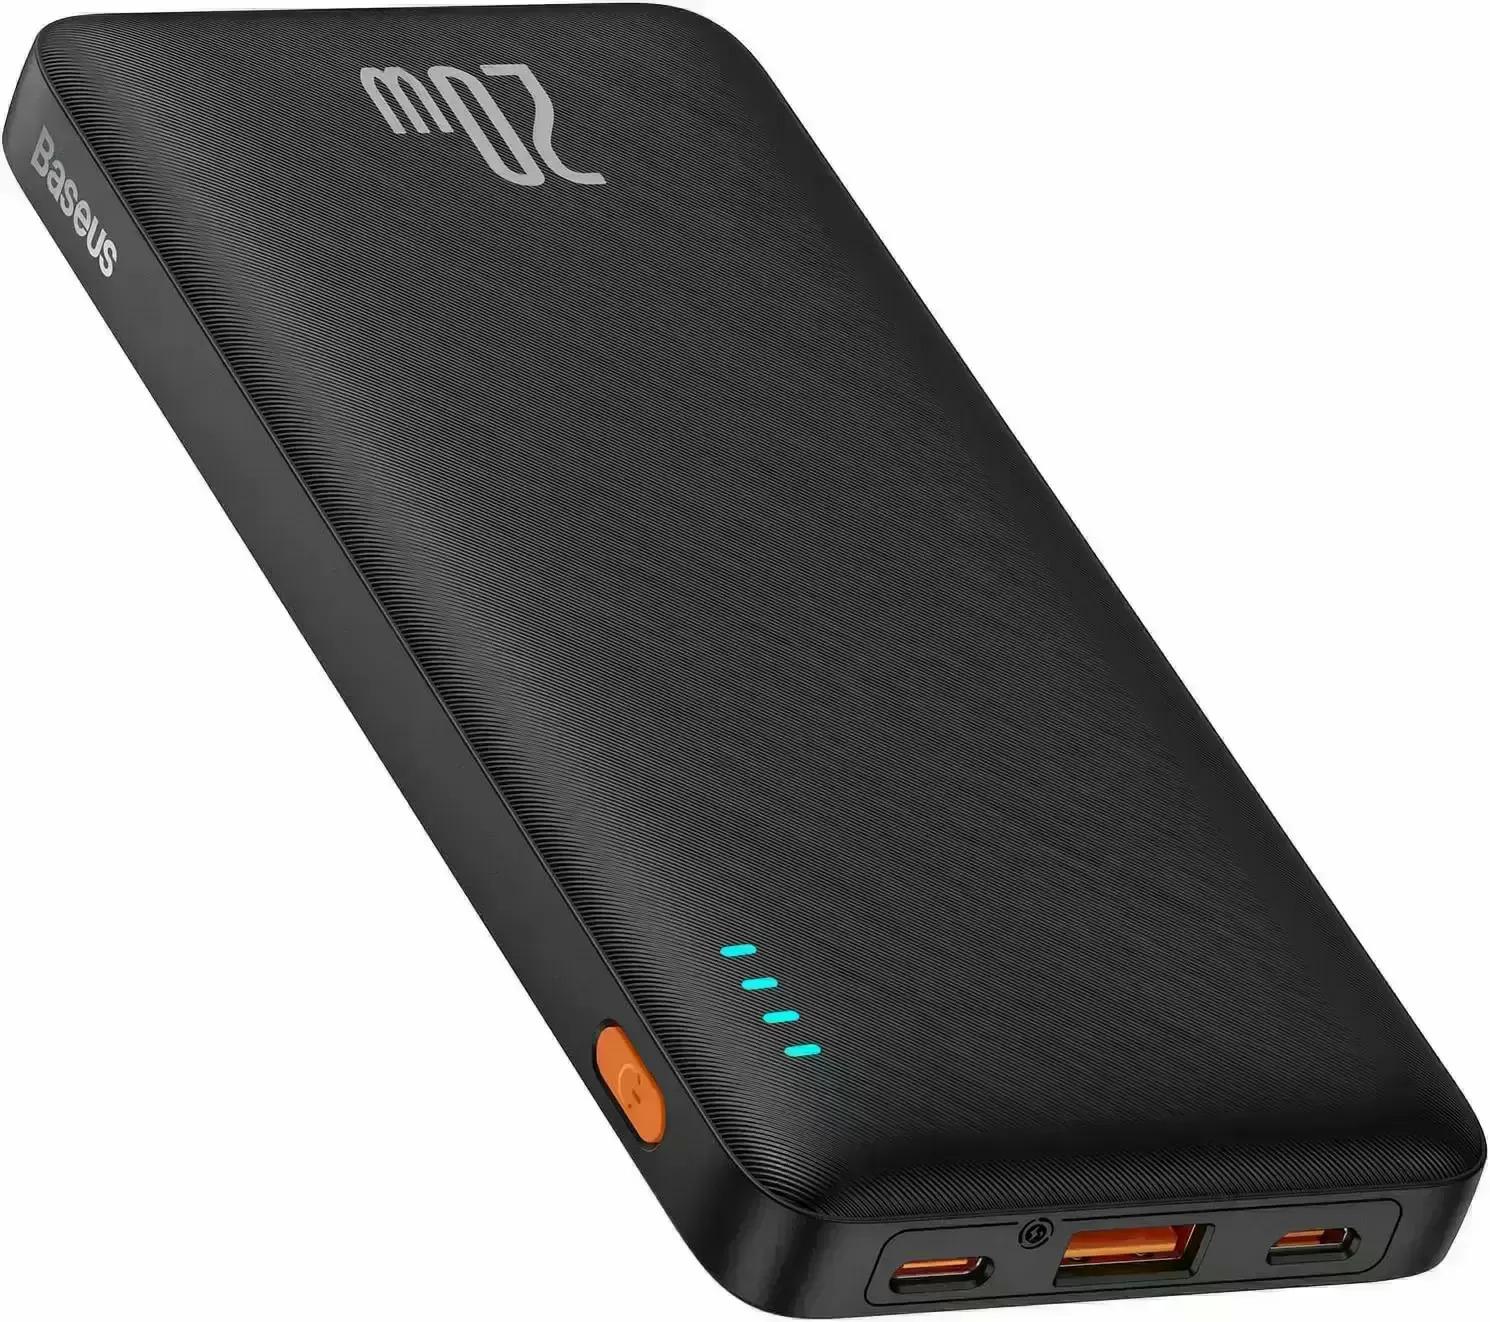 Baseus PD 20W 10000mAh Portable Charger Power Bank for $11.99